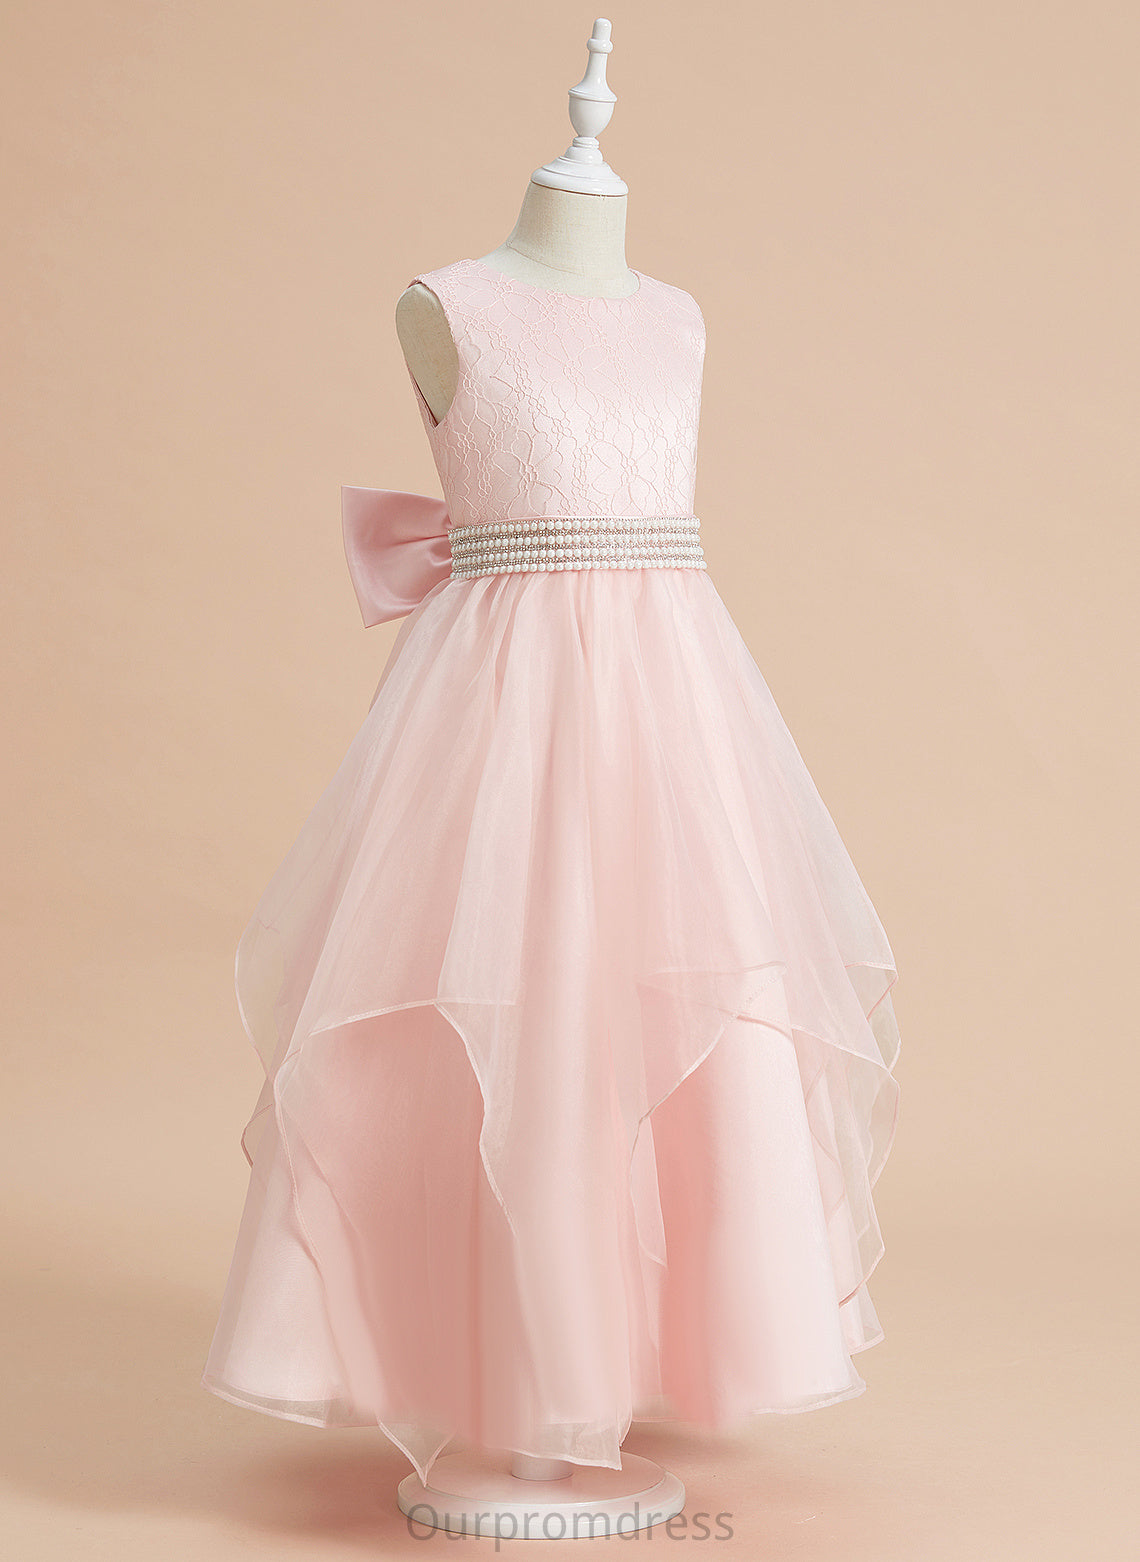 - Ankle-length Organza/Lace Girl Sleeveless Flower Dress Flower Girl Dresses Scoop Neck With Beading/Bow(s) Serenity Ball-Gown/Princess